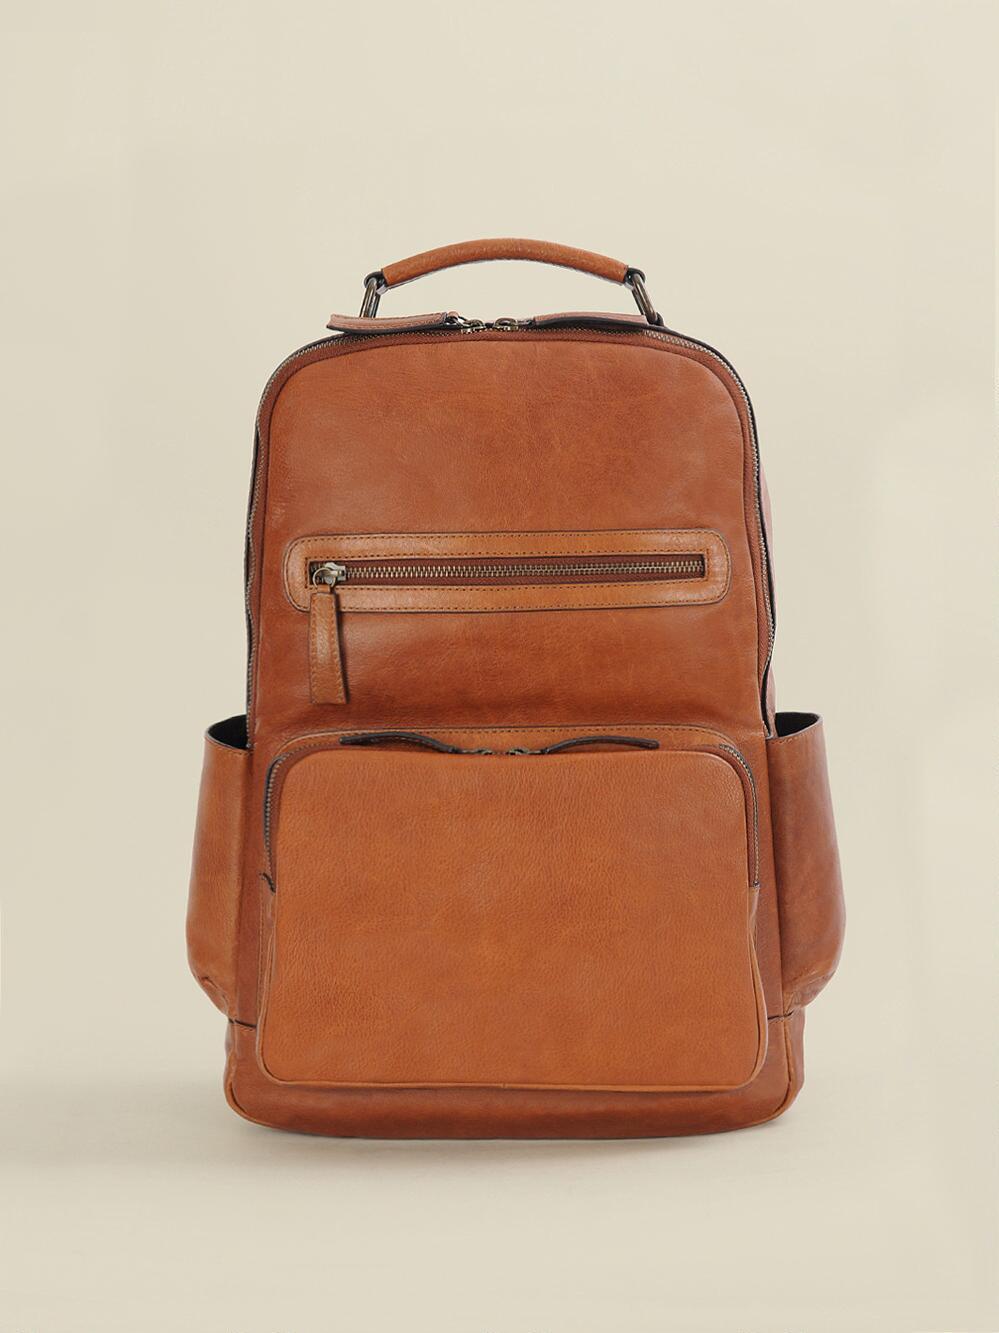 Wilsons Leather Vintage Leather Crunch Backpack in Cognac (Brown) - Lyst